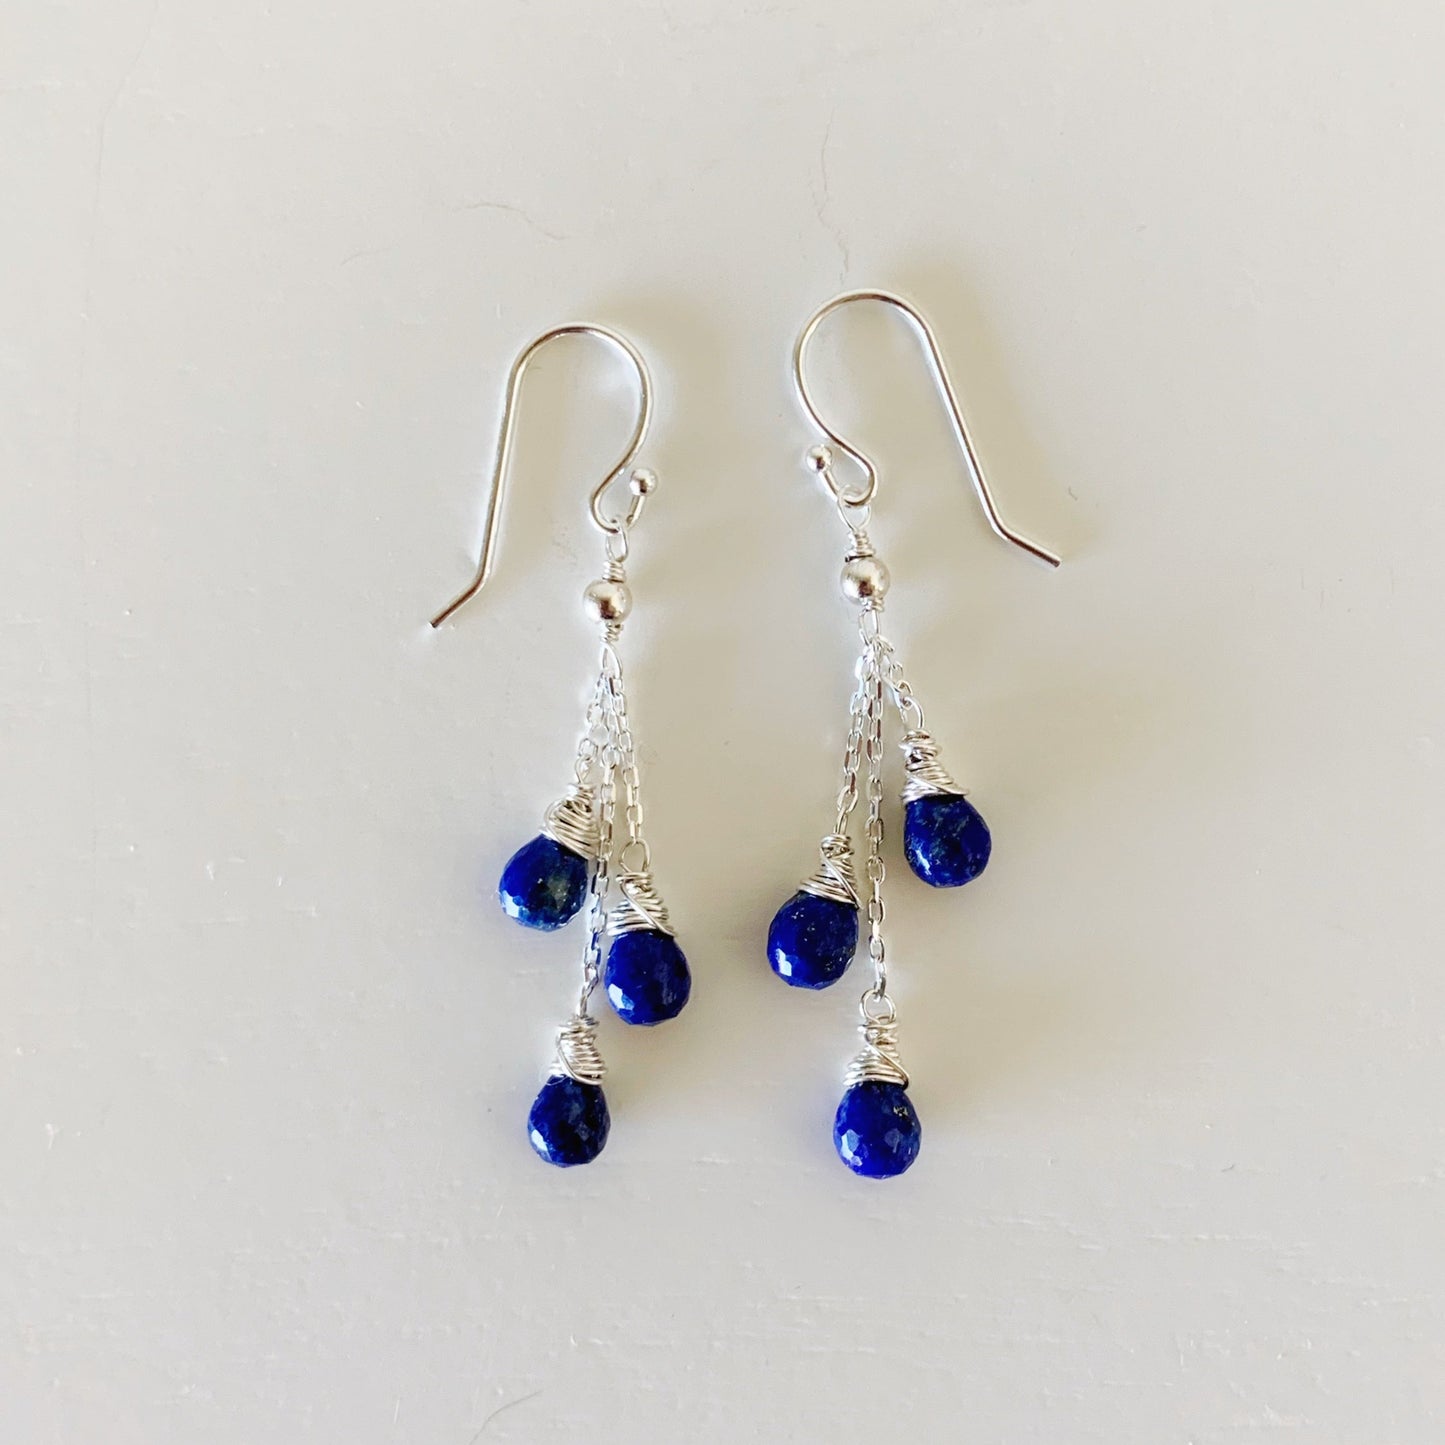 the neptune earrings by mermaids and madeleines are a eclectic style with three strands of sterling silver chain on each earring hook with royal blue lapis teardrop wire wrapped beads on the end of each strand. this pair of earrings is photographed flat on a white surface